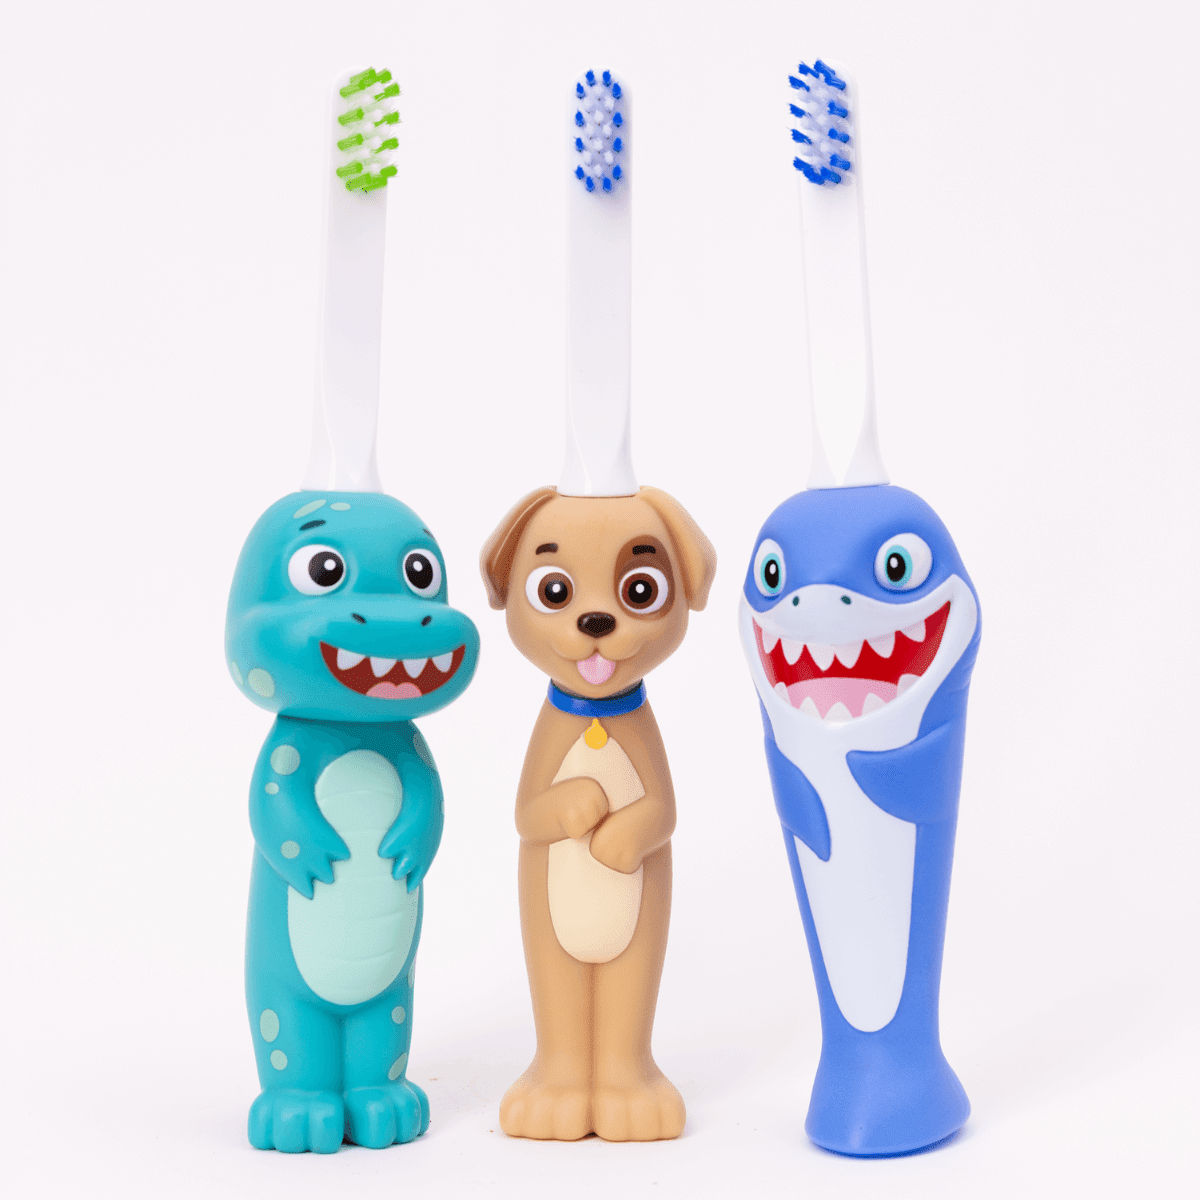 Assortment of three toothbrushes, including Chompers the Shark